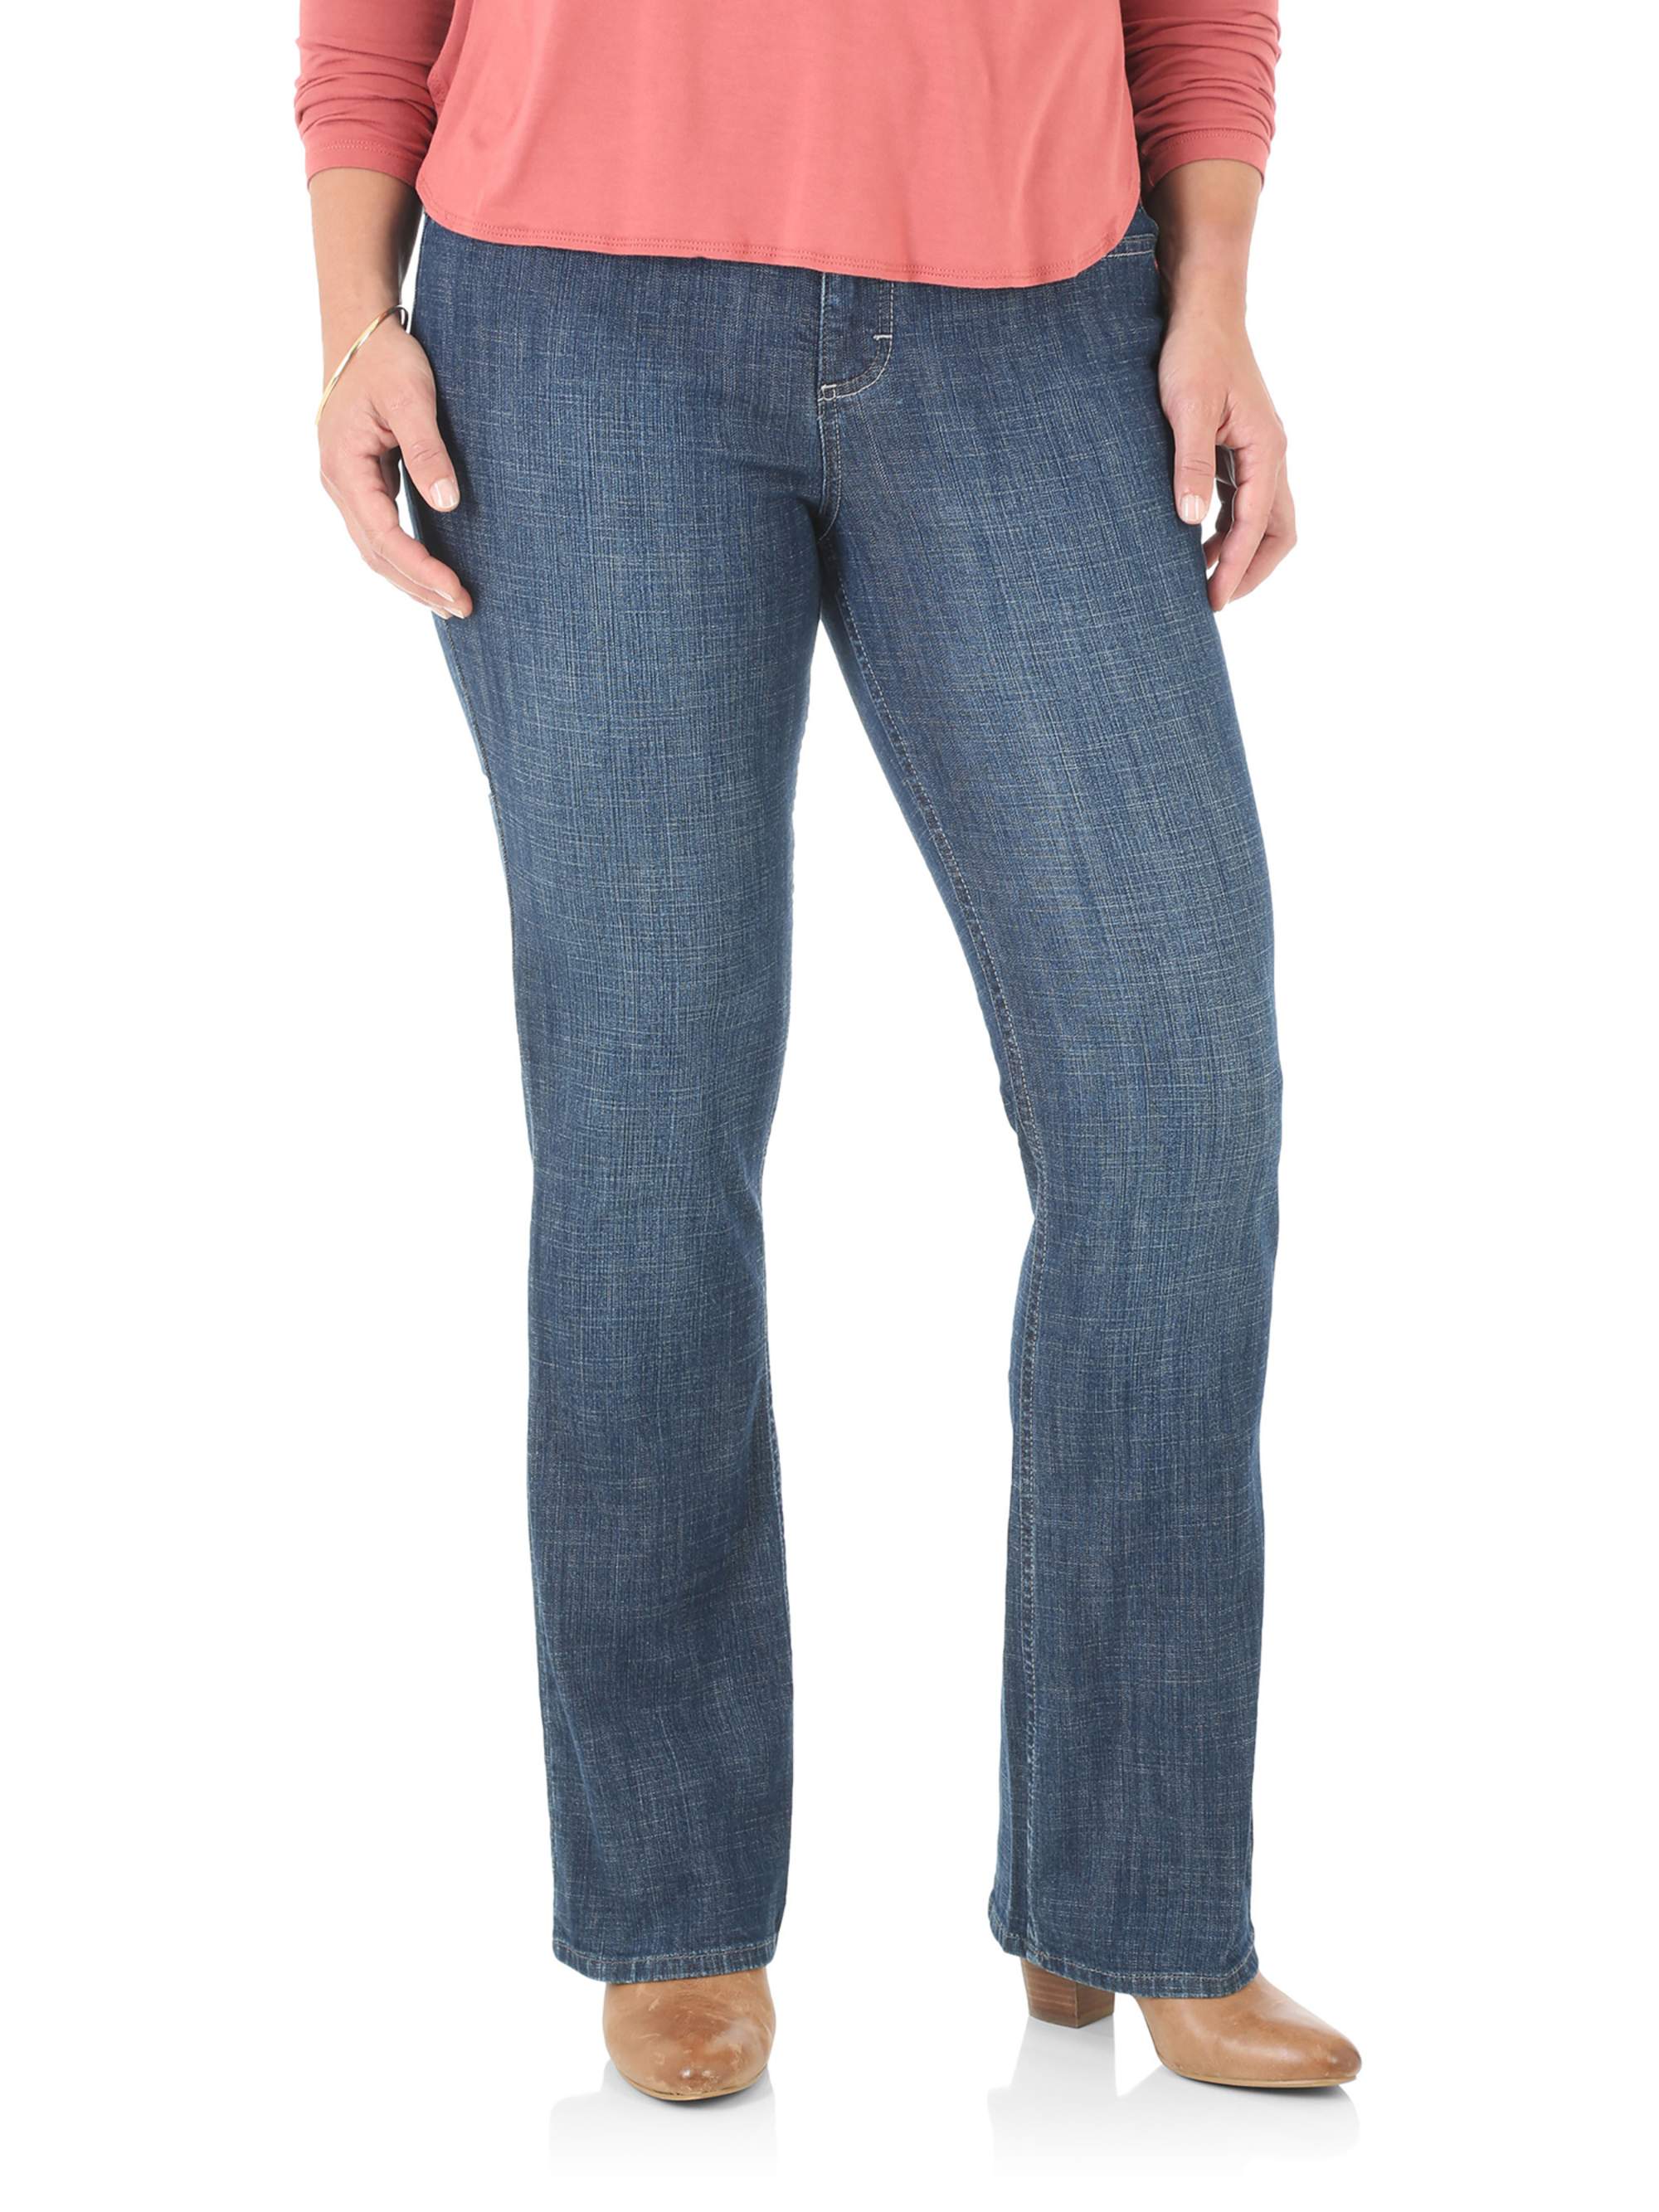 Women's Slender Stretch Bootcut Jean - image 1 of 4